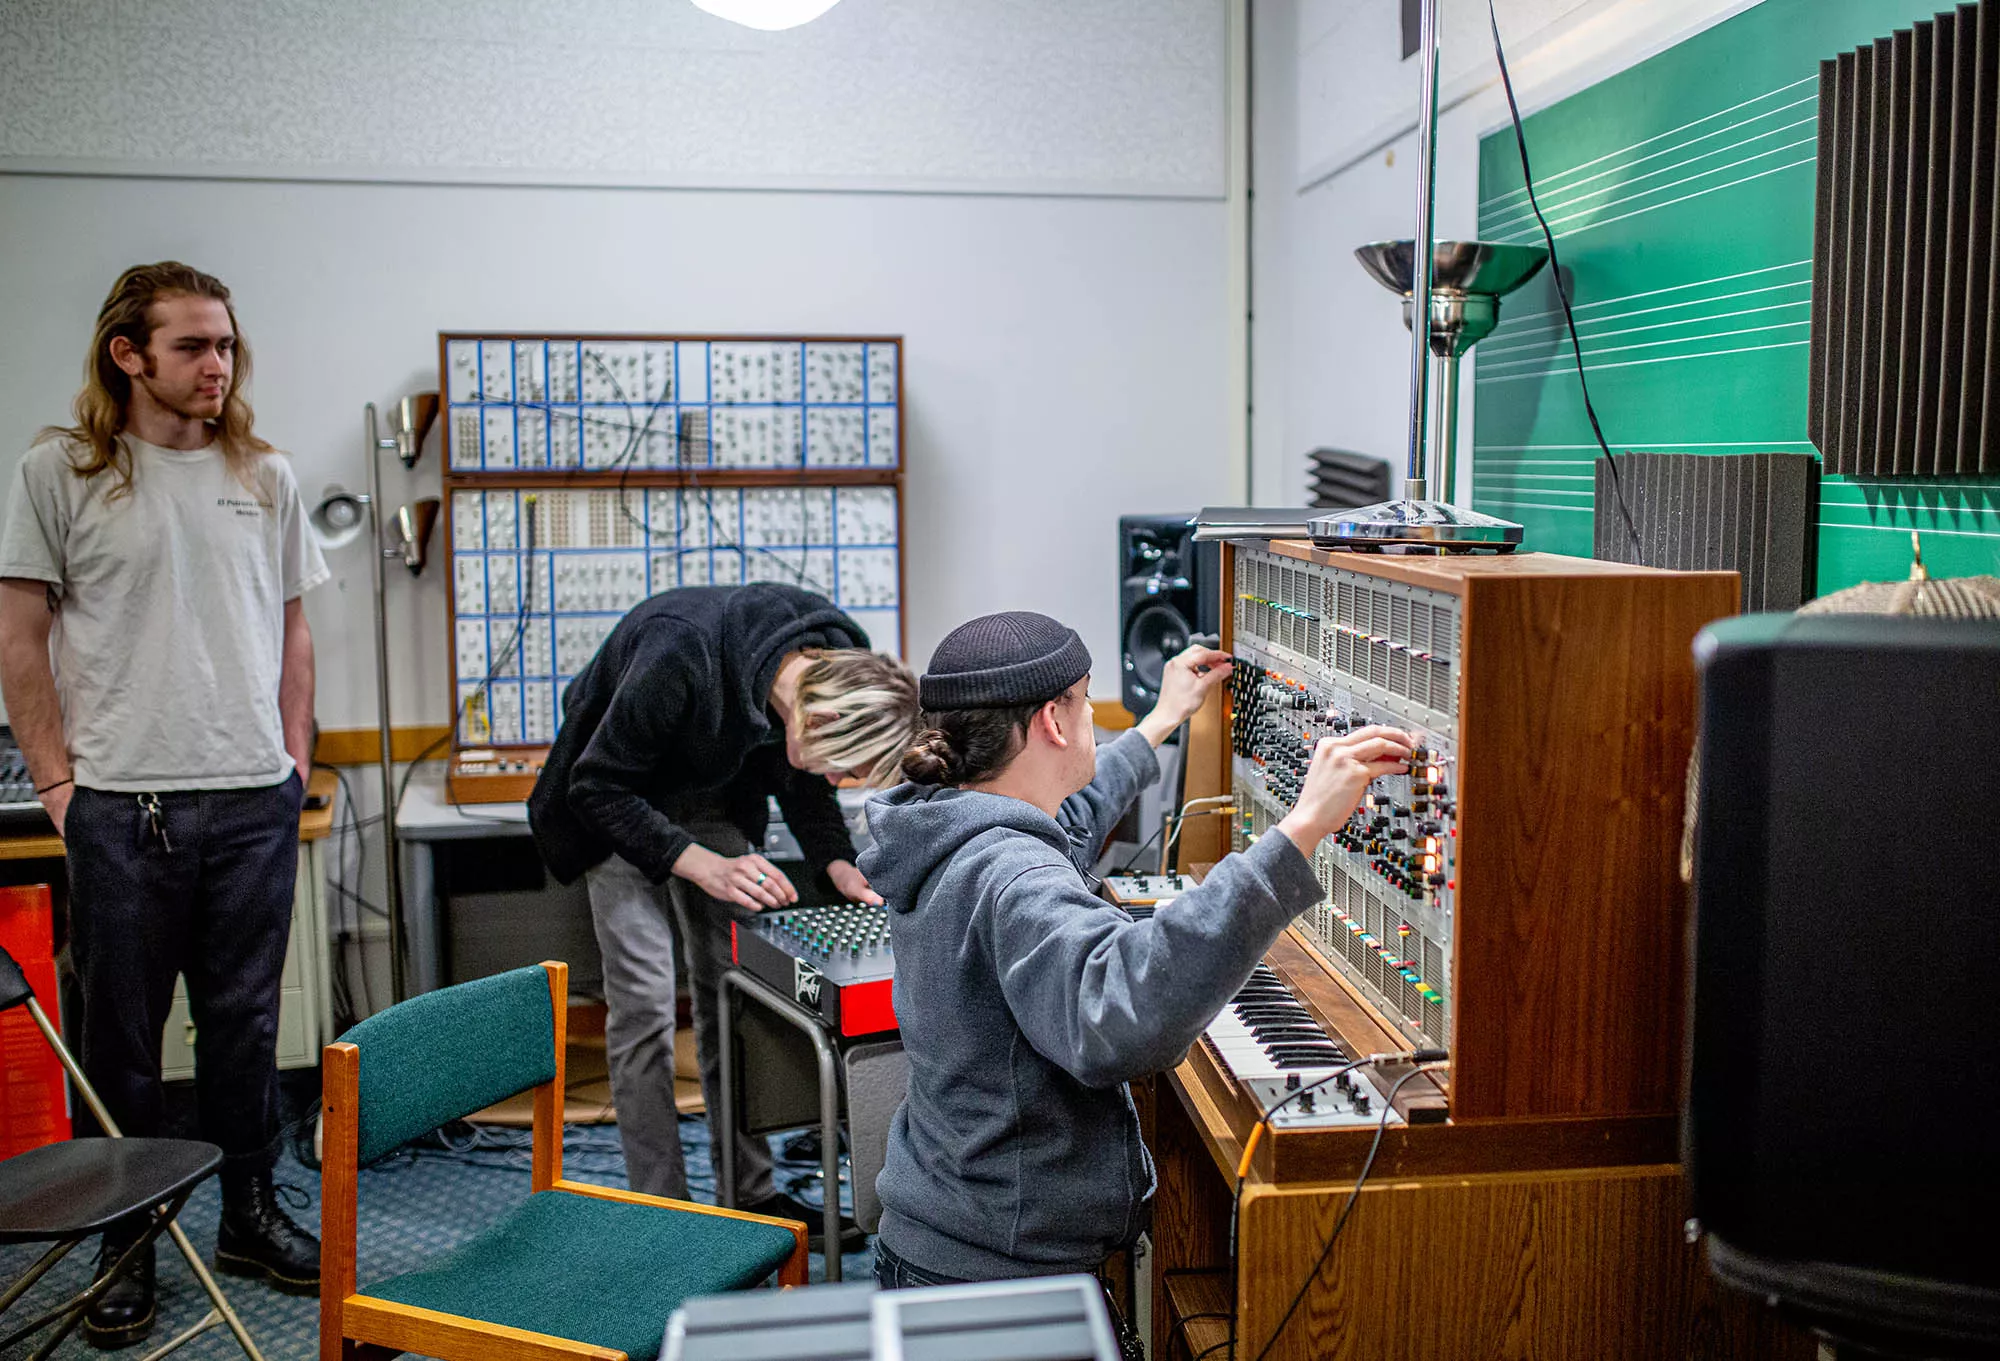 Students working together at a large synthesizer